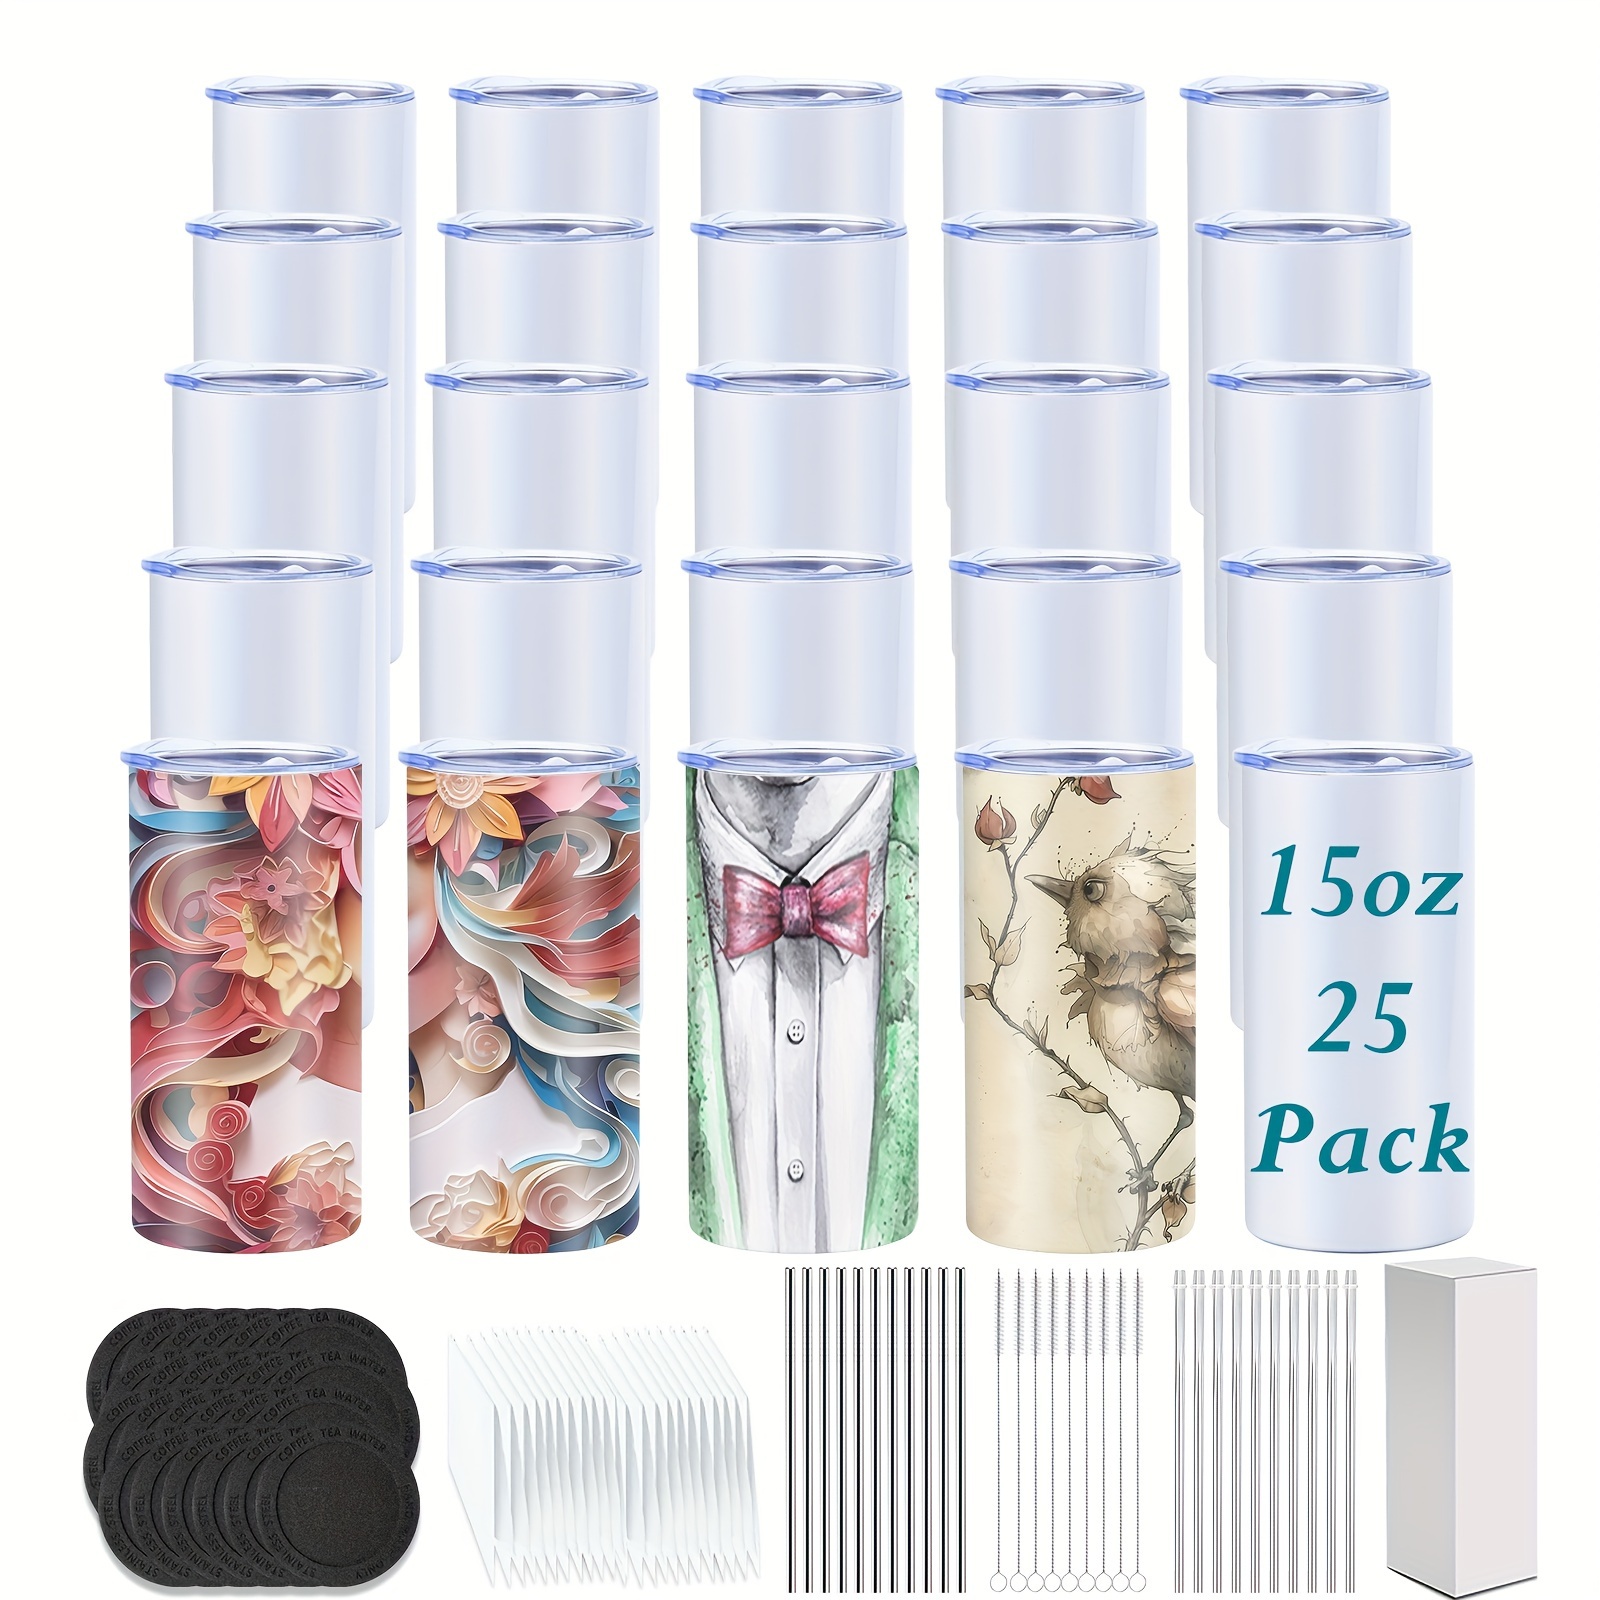 

25pcs, 15oz Skinny Sublimation Tumblers, With Optional Accessories, Stainless Steel Double Wall Insulated Cup, Polymer Coating For Heat Transfer